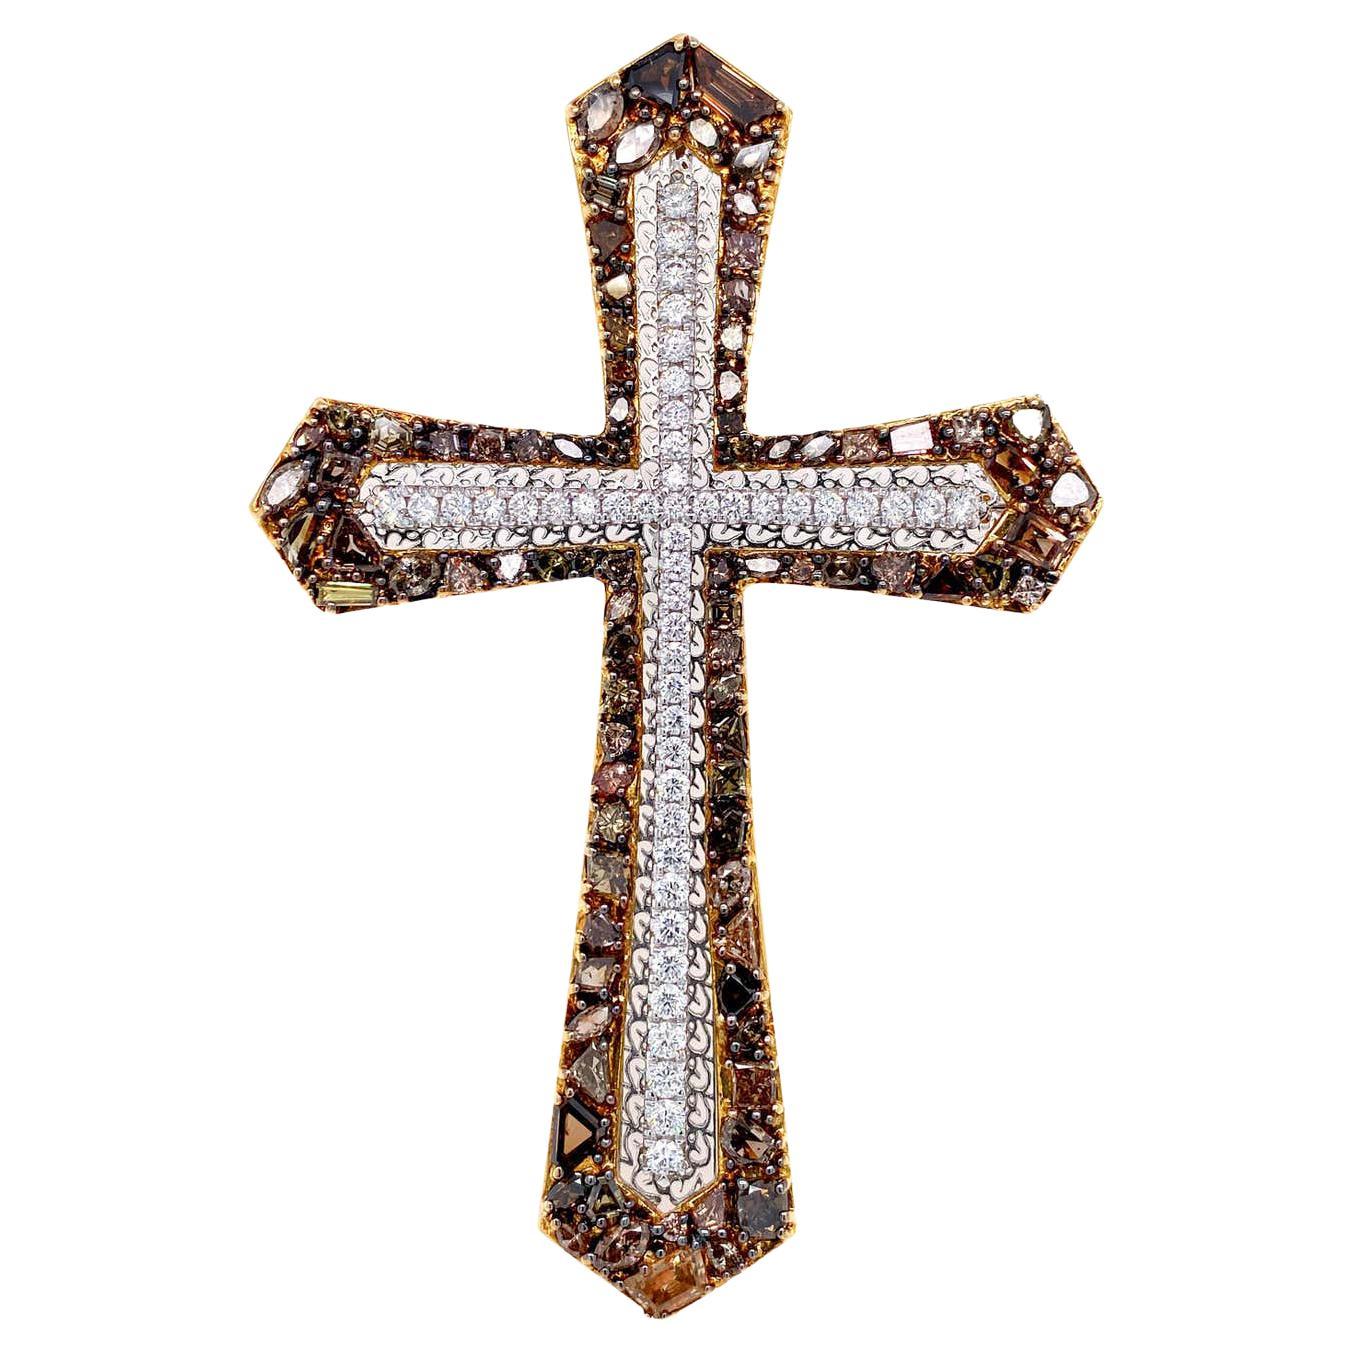 Transformable Fancy Color Diamond Cross Brooch and Pendant by Dilys’ in 18K Gold